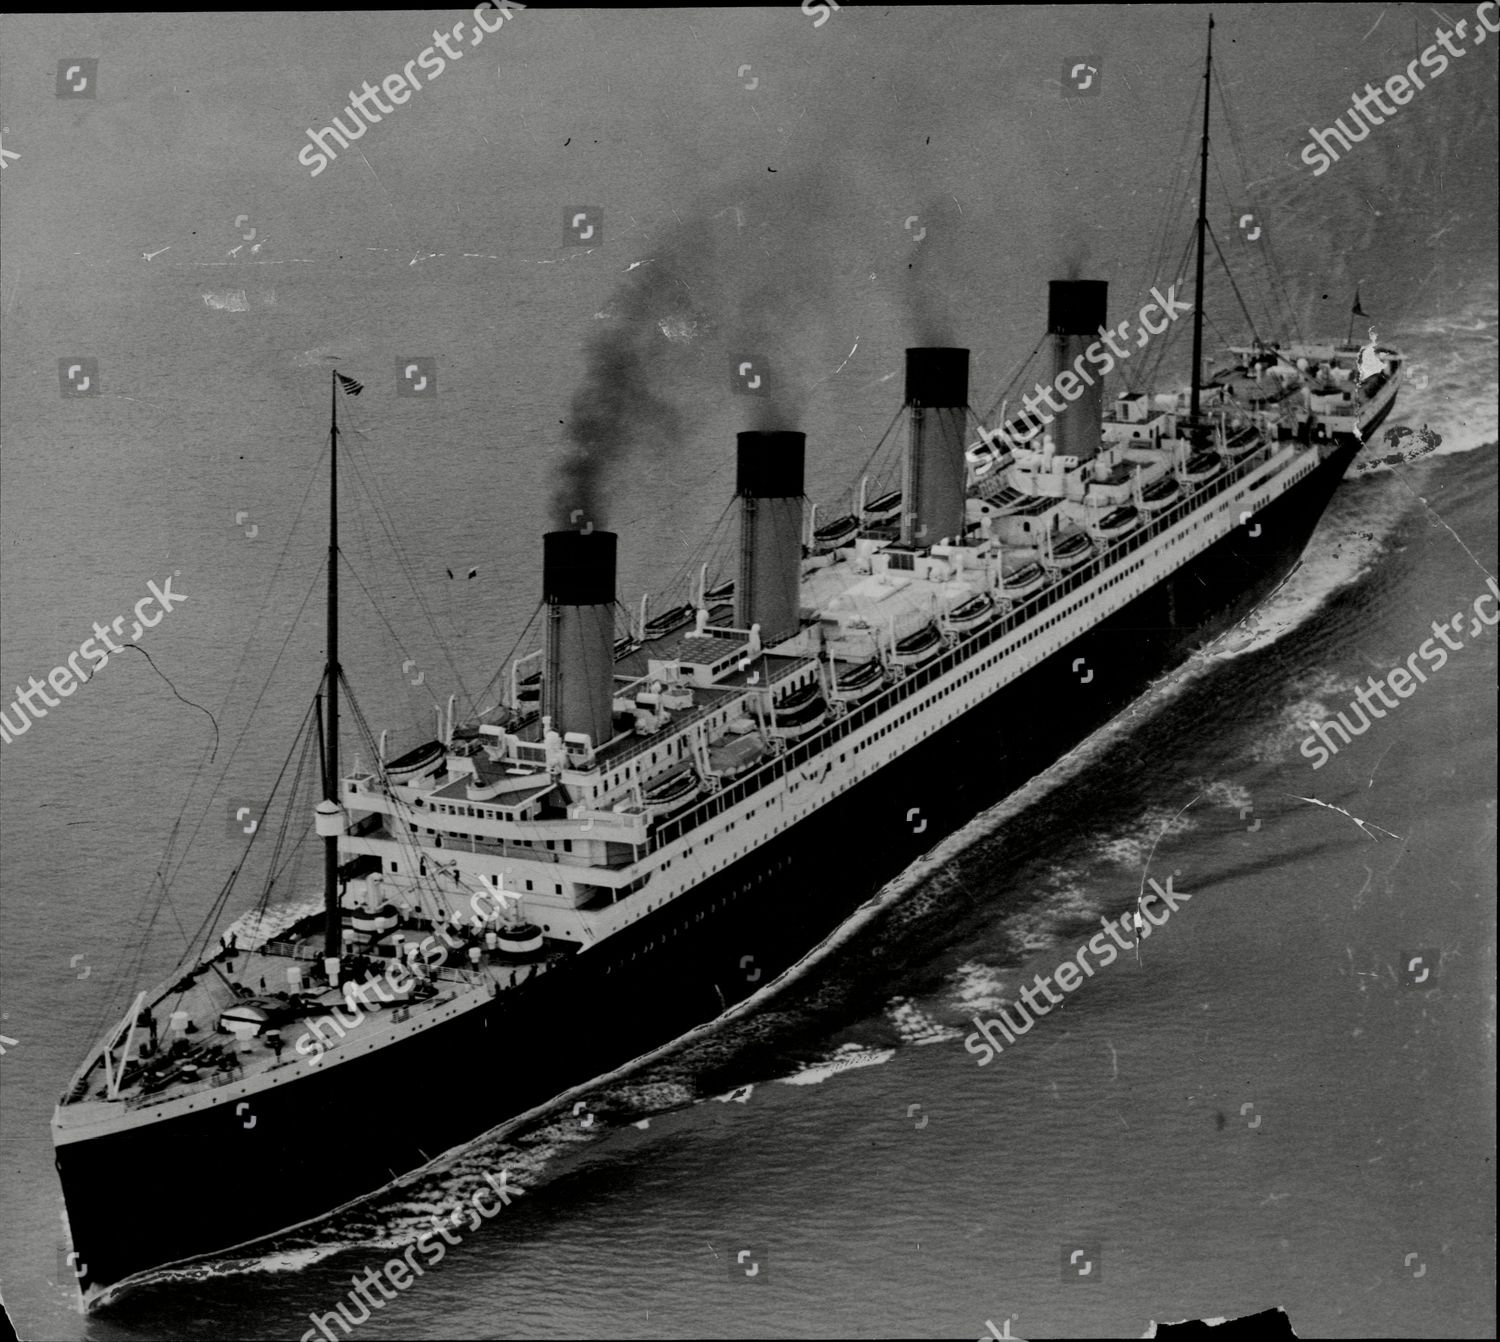 RMS Olympic - The Old Reliable